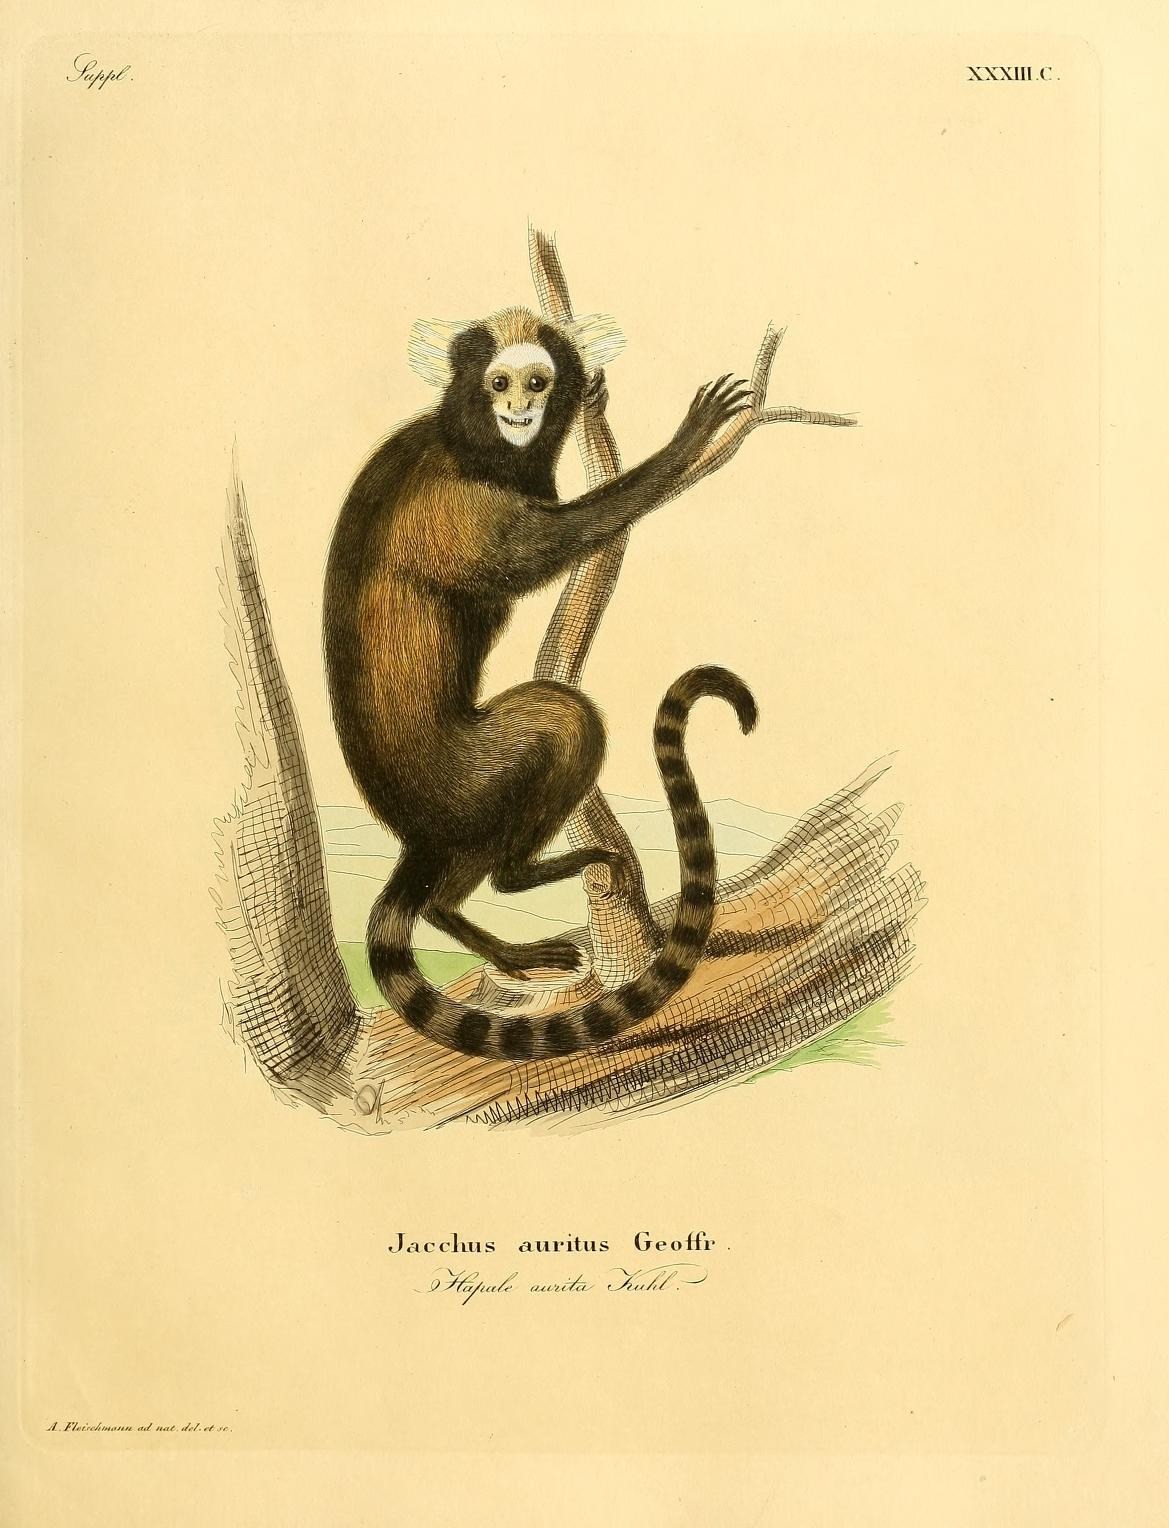 a print of a monkey and its surroundings is in color